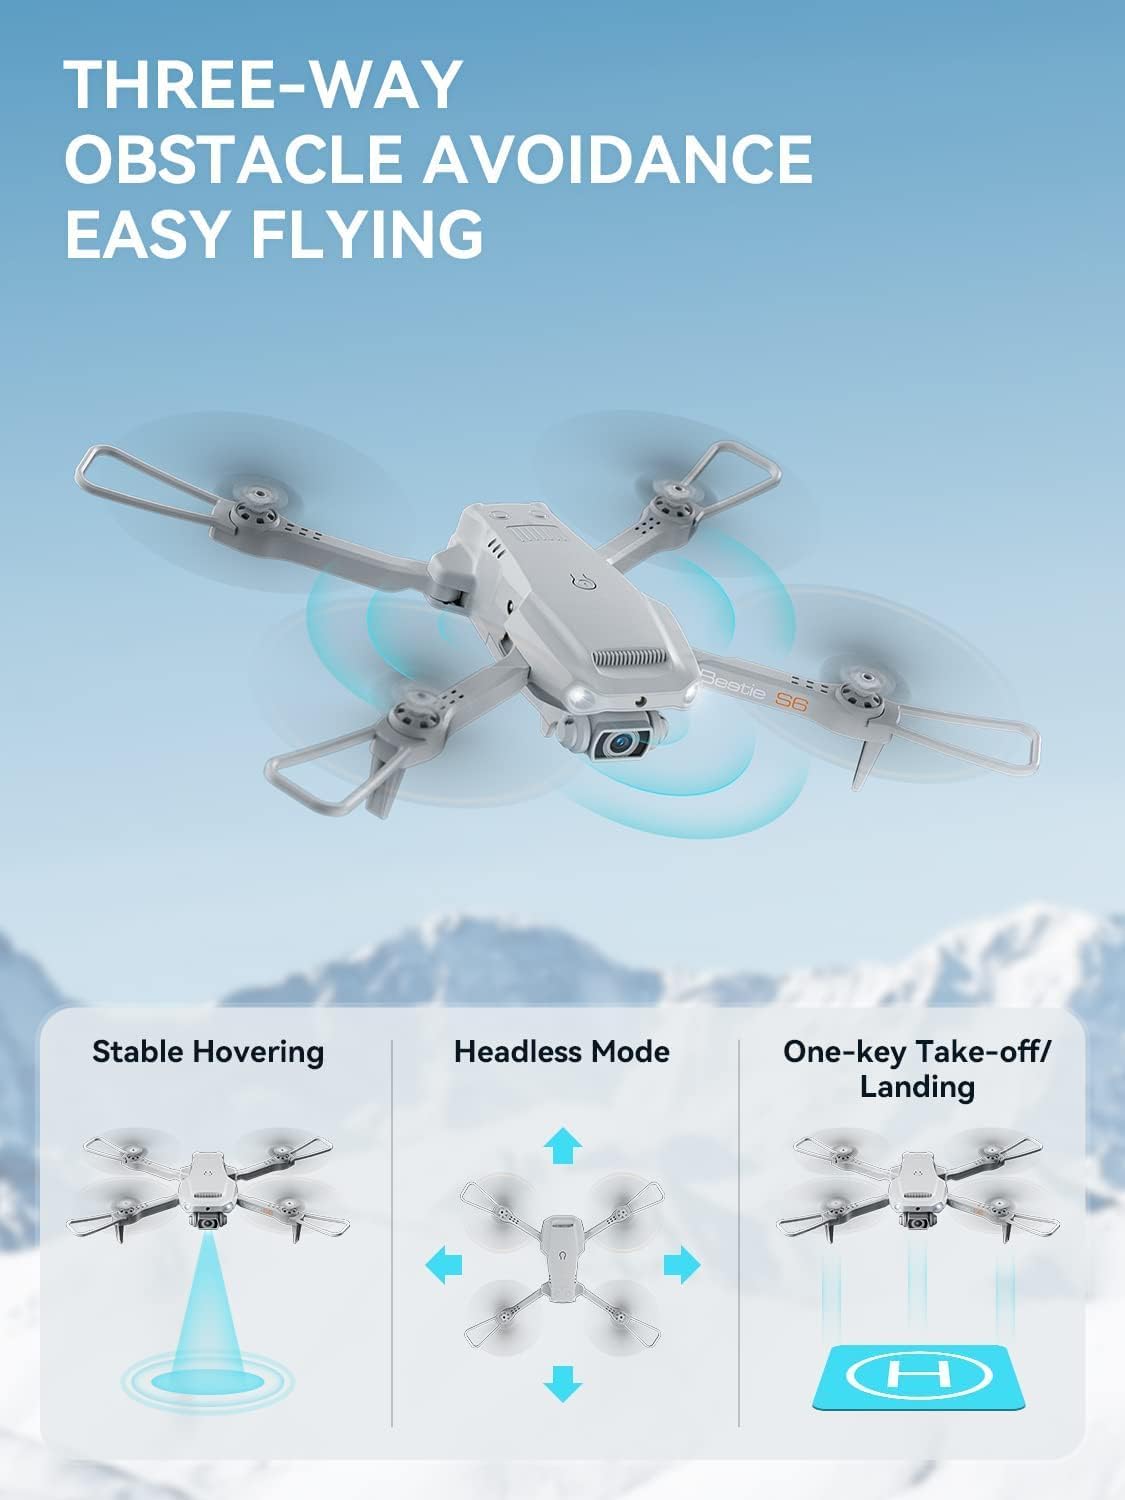 ROVPRO S60 Drone, THREE-WAY OBSTACLE AVOIDANCE E